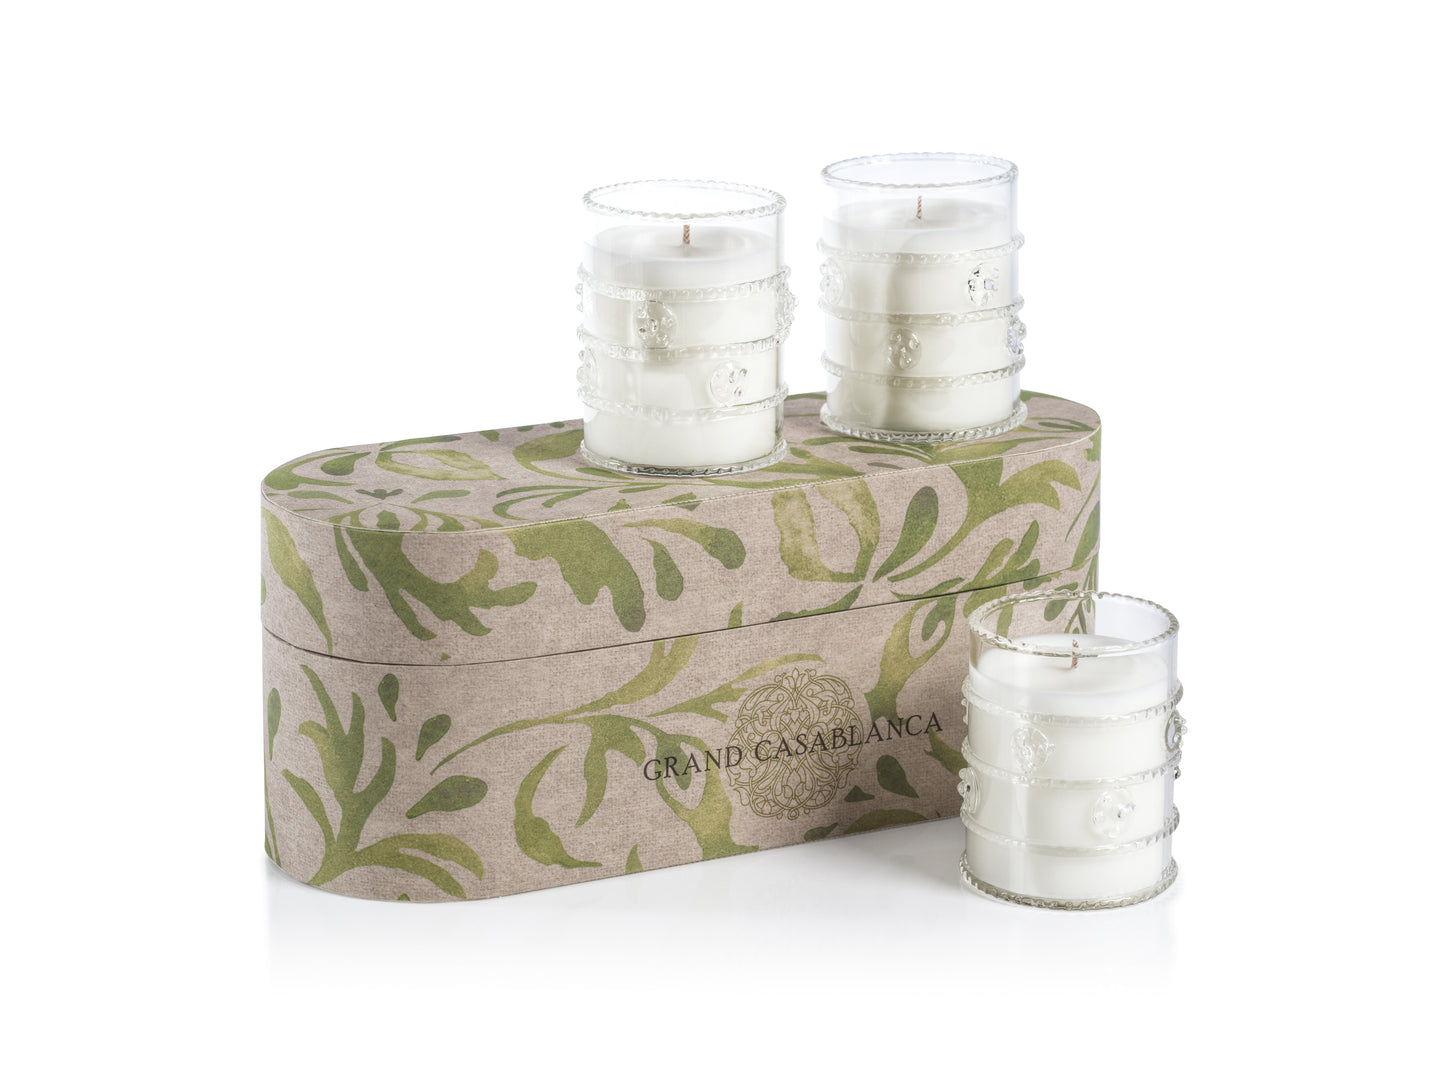 APRICOT BLOOM Zodax Grand Casablanca Scented Candle Trio - Gift Boxed